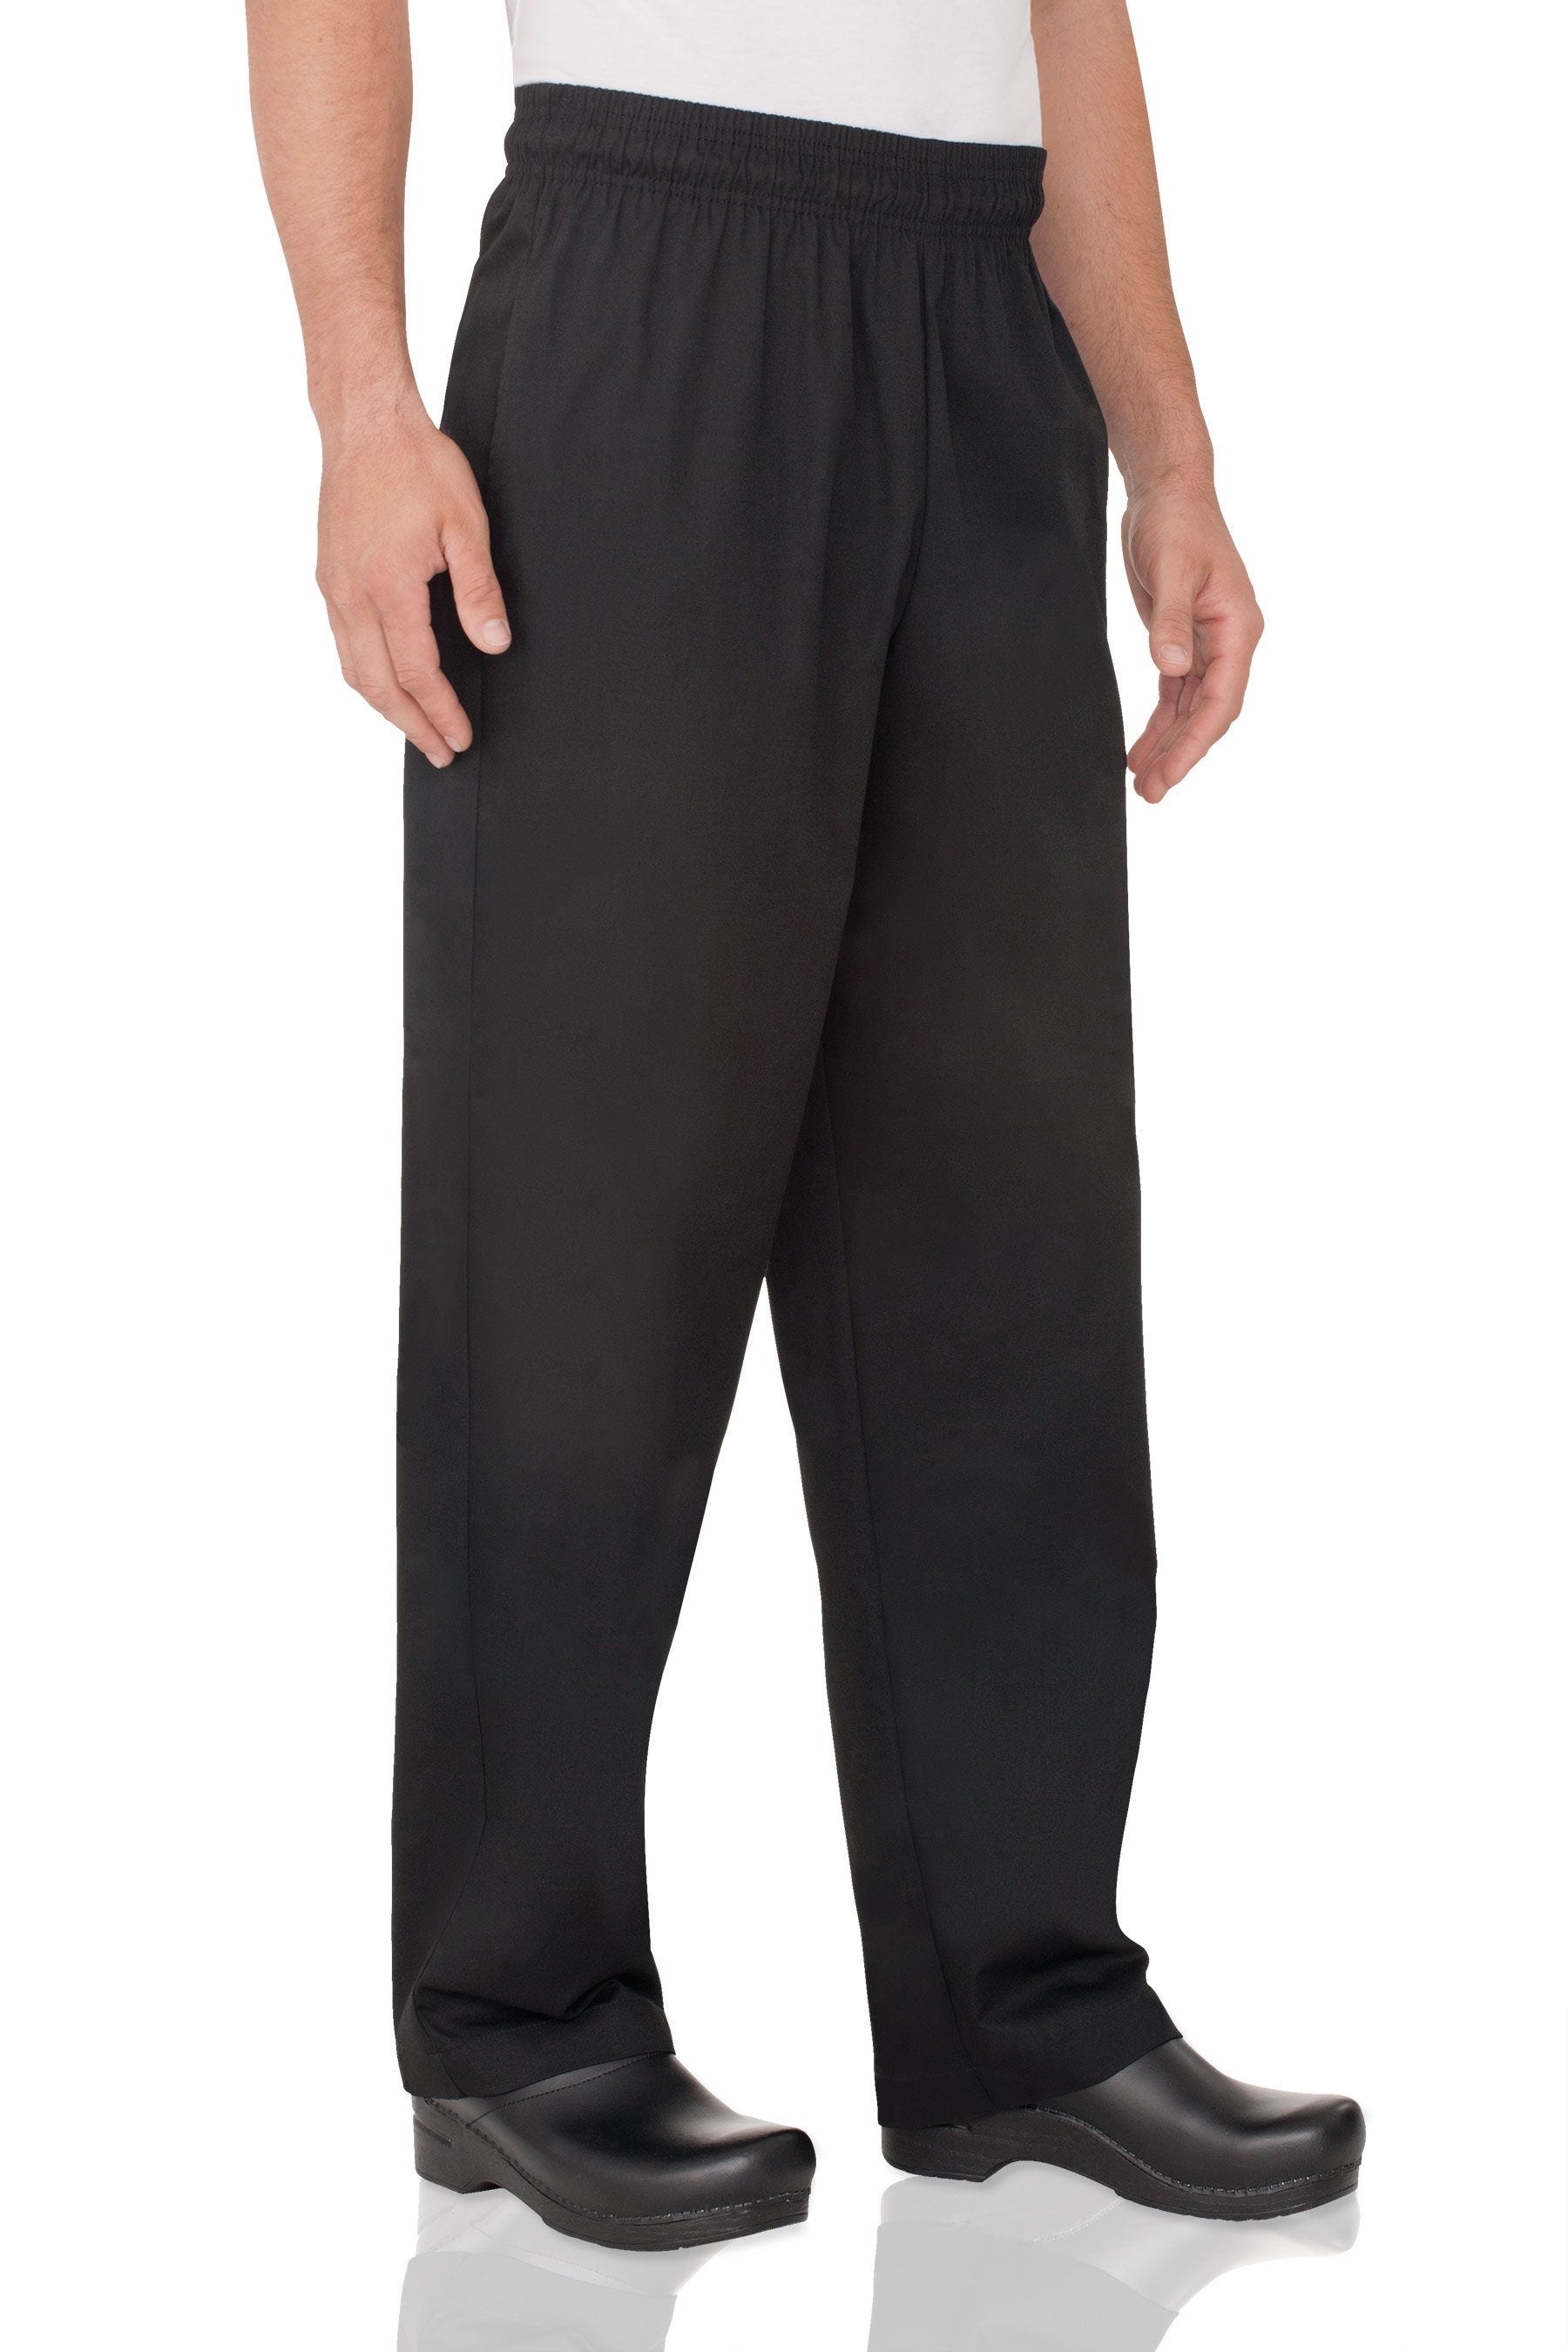 NEW Chef Works Women's Essential Baggy Chef Pants Black X-Small FREE2DAYSHIP 